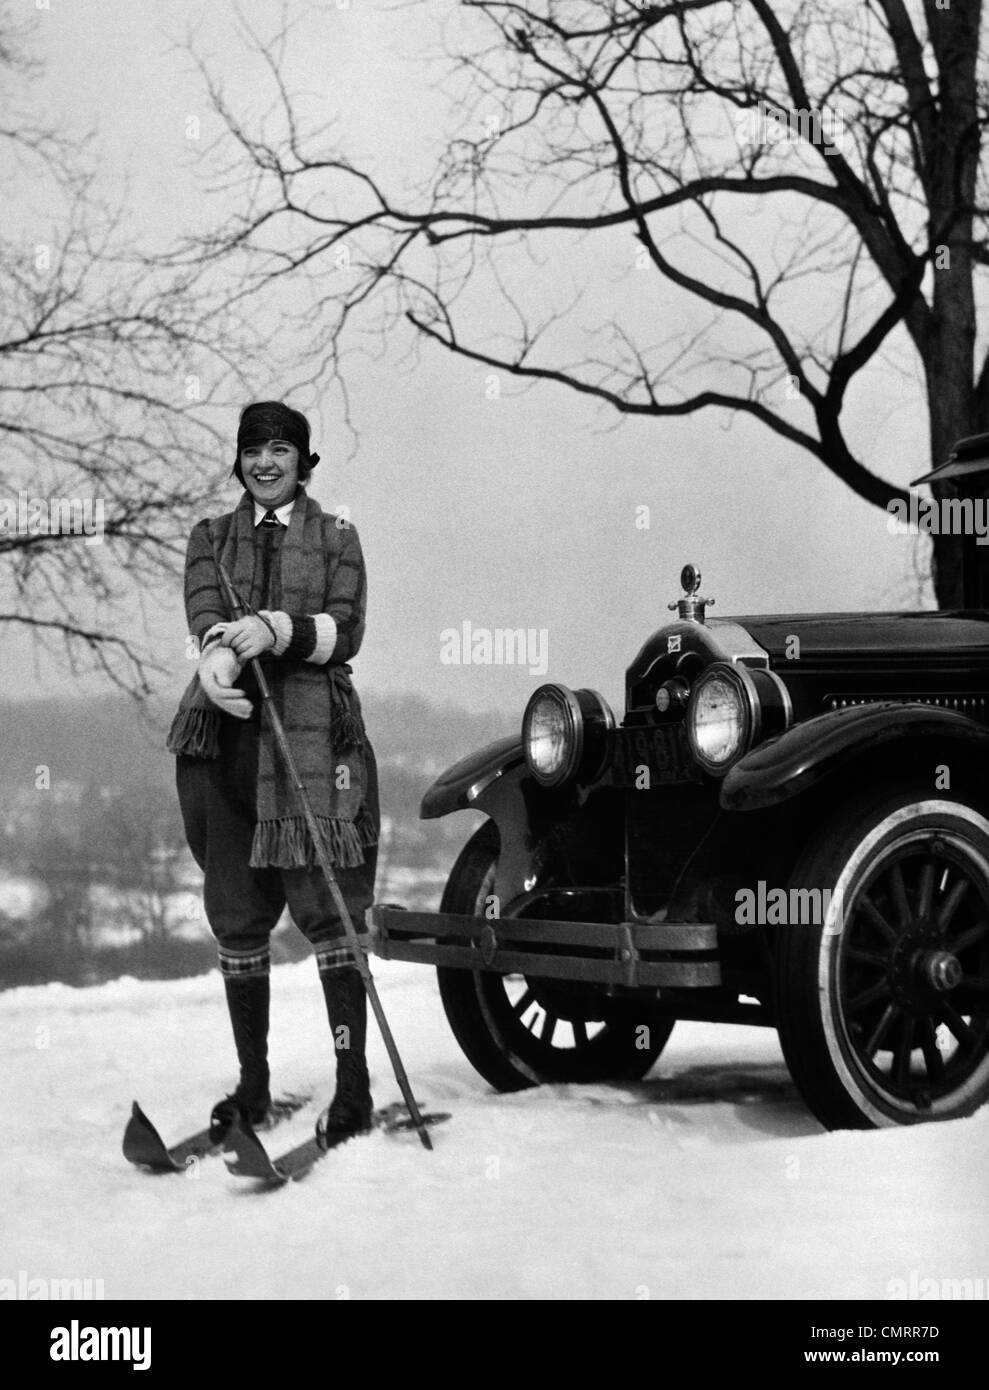 1920s WOMAN ON SKIS STANDING IN FRONT OF CAR PULLING ON GLOVE Stock Photo